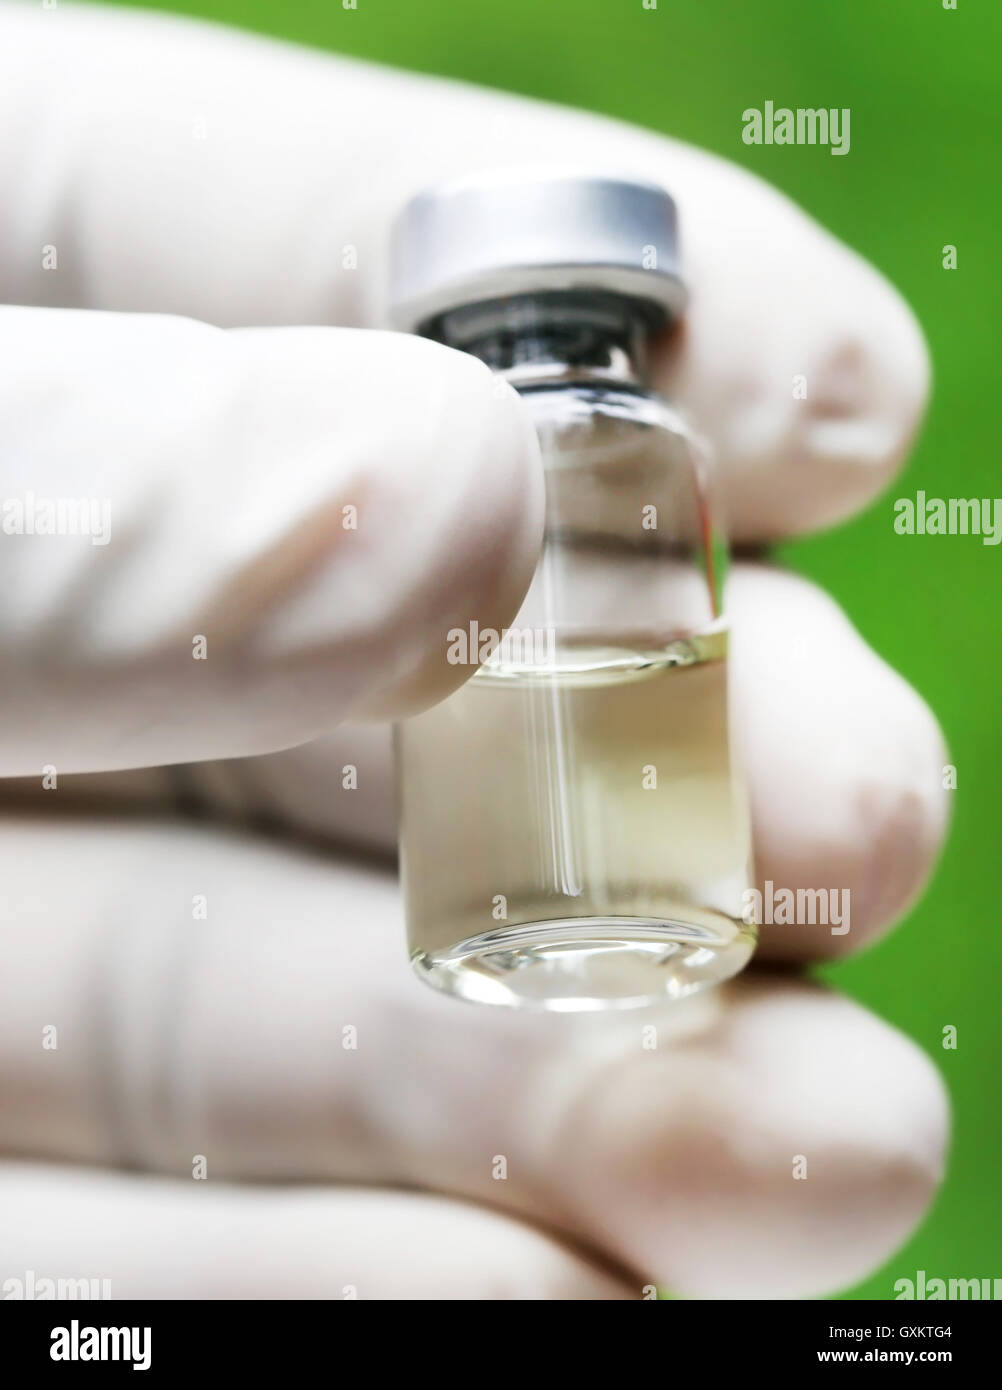 Closeup of a vial holding by hand Stock Photo